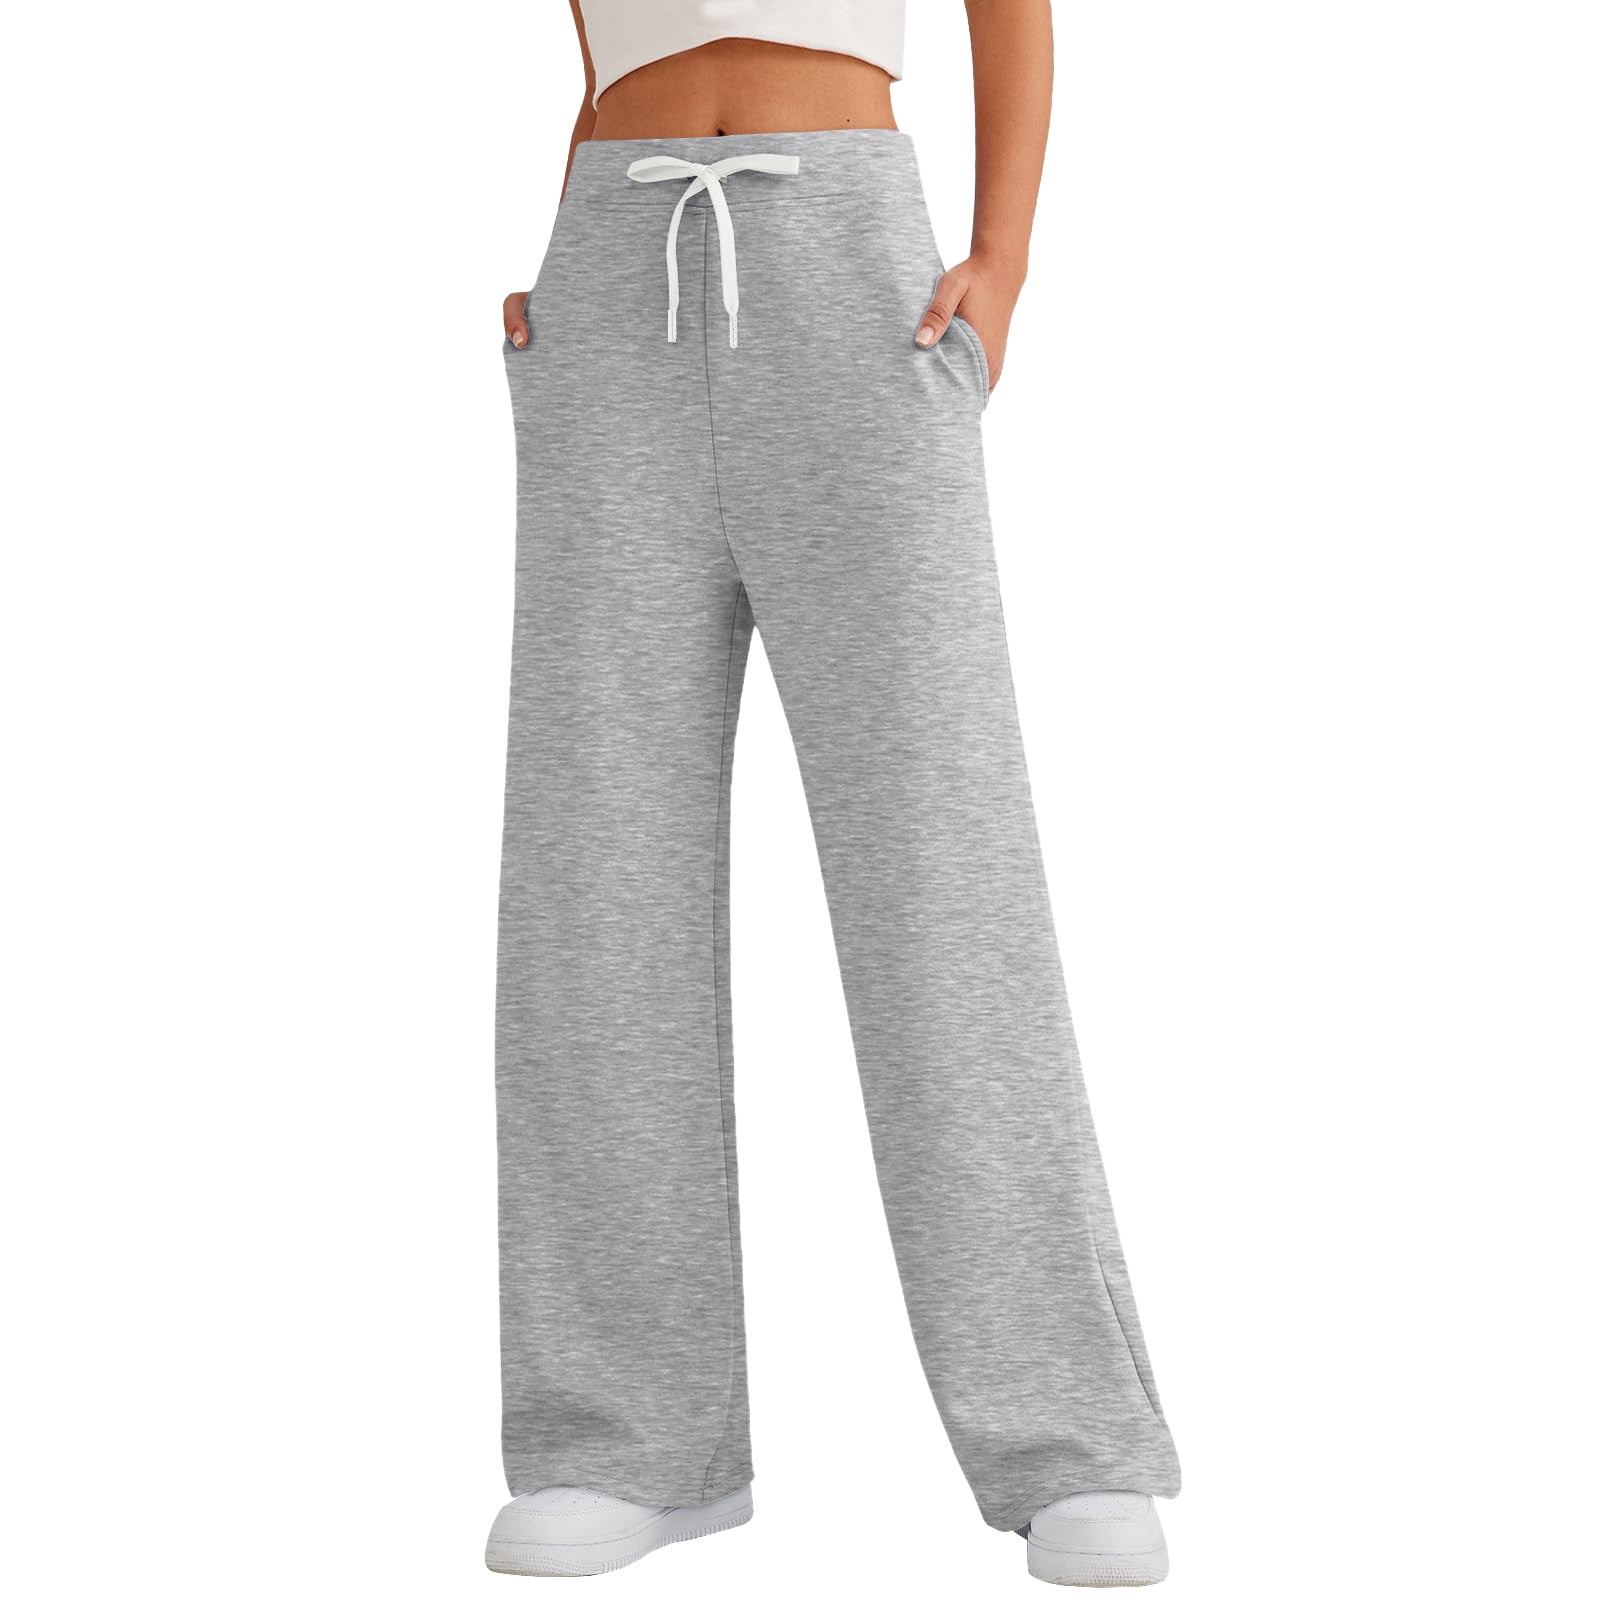 Susanny Women's Sweatpants Cotton with Pockets Open Bottom Petite Wide Leg  High Waisted Drawstring Athletic Works Girls Sweatpants Flare Clearance